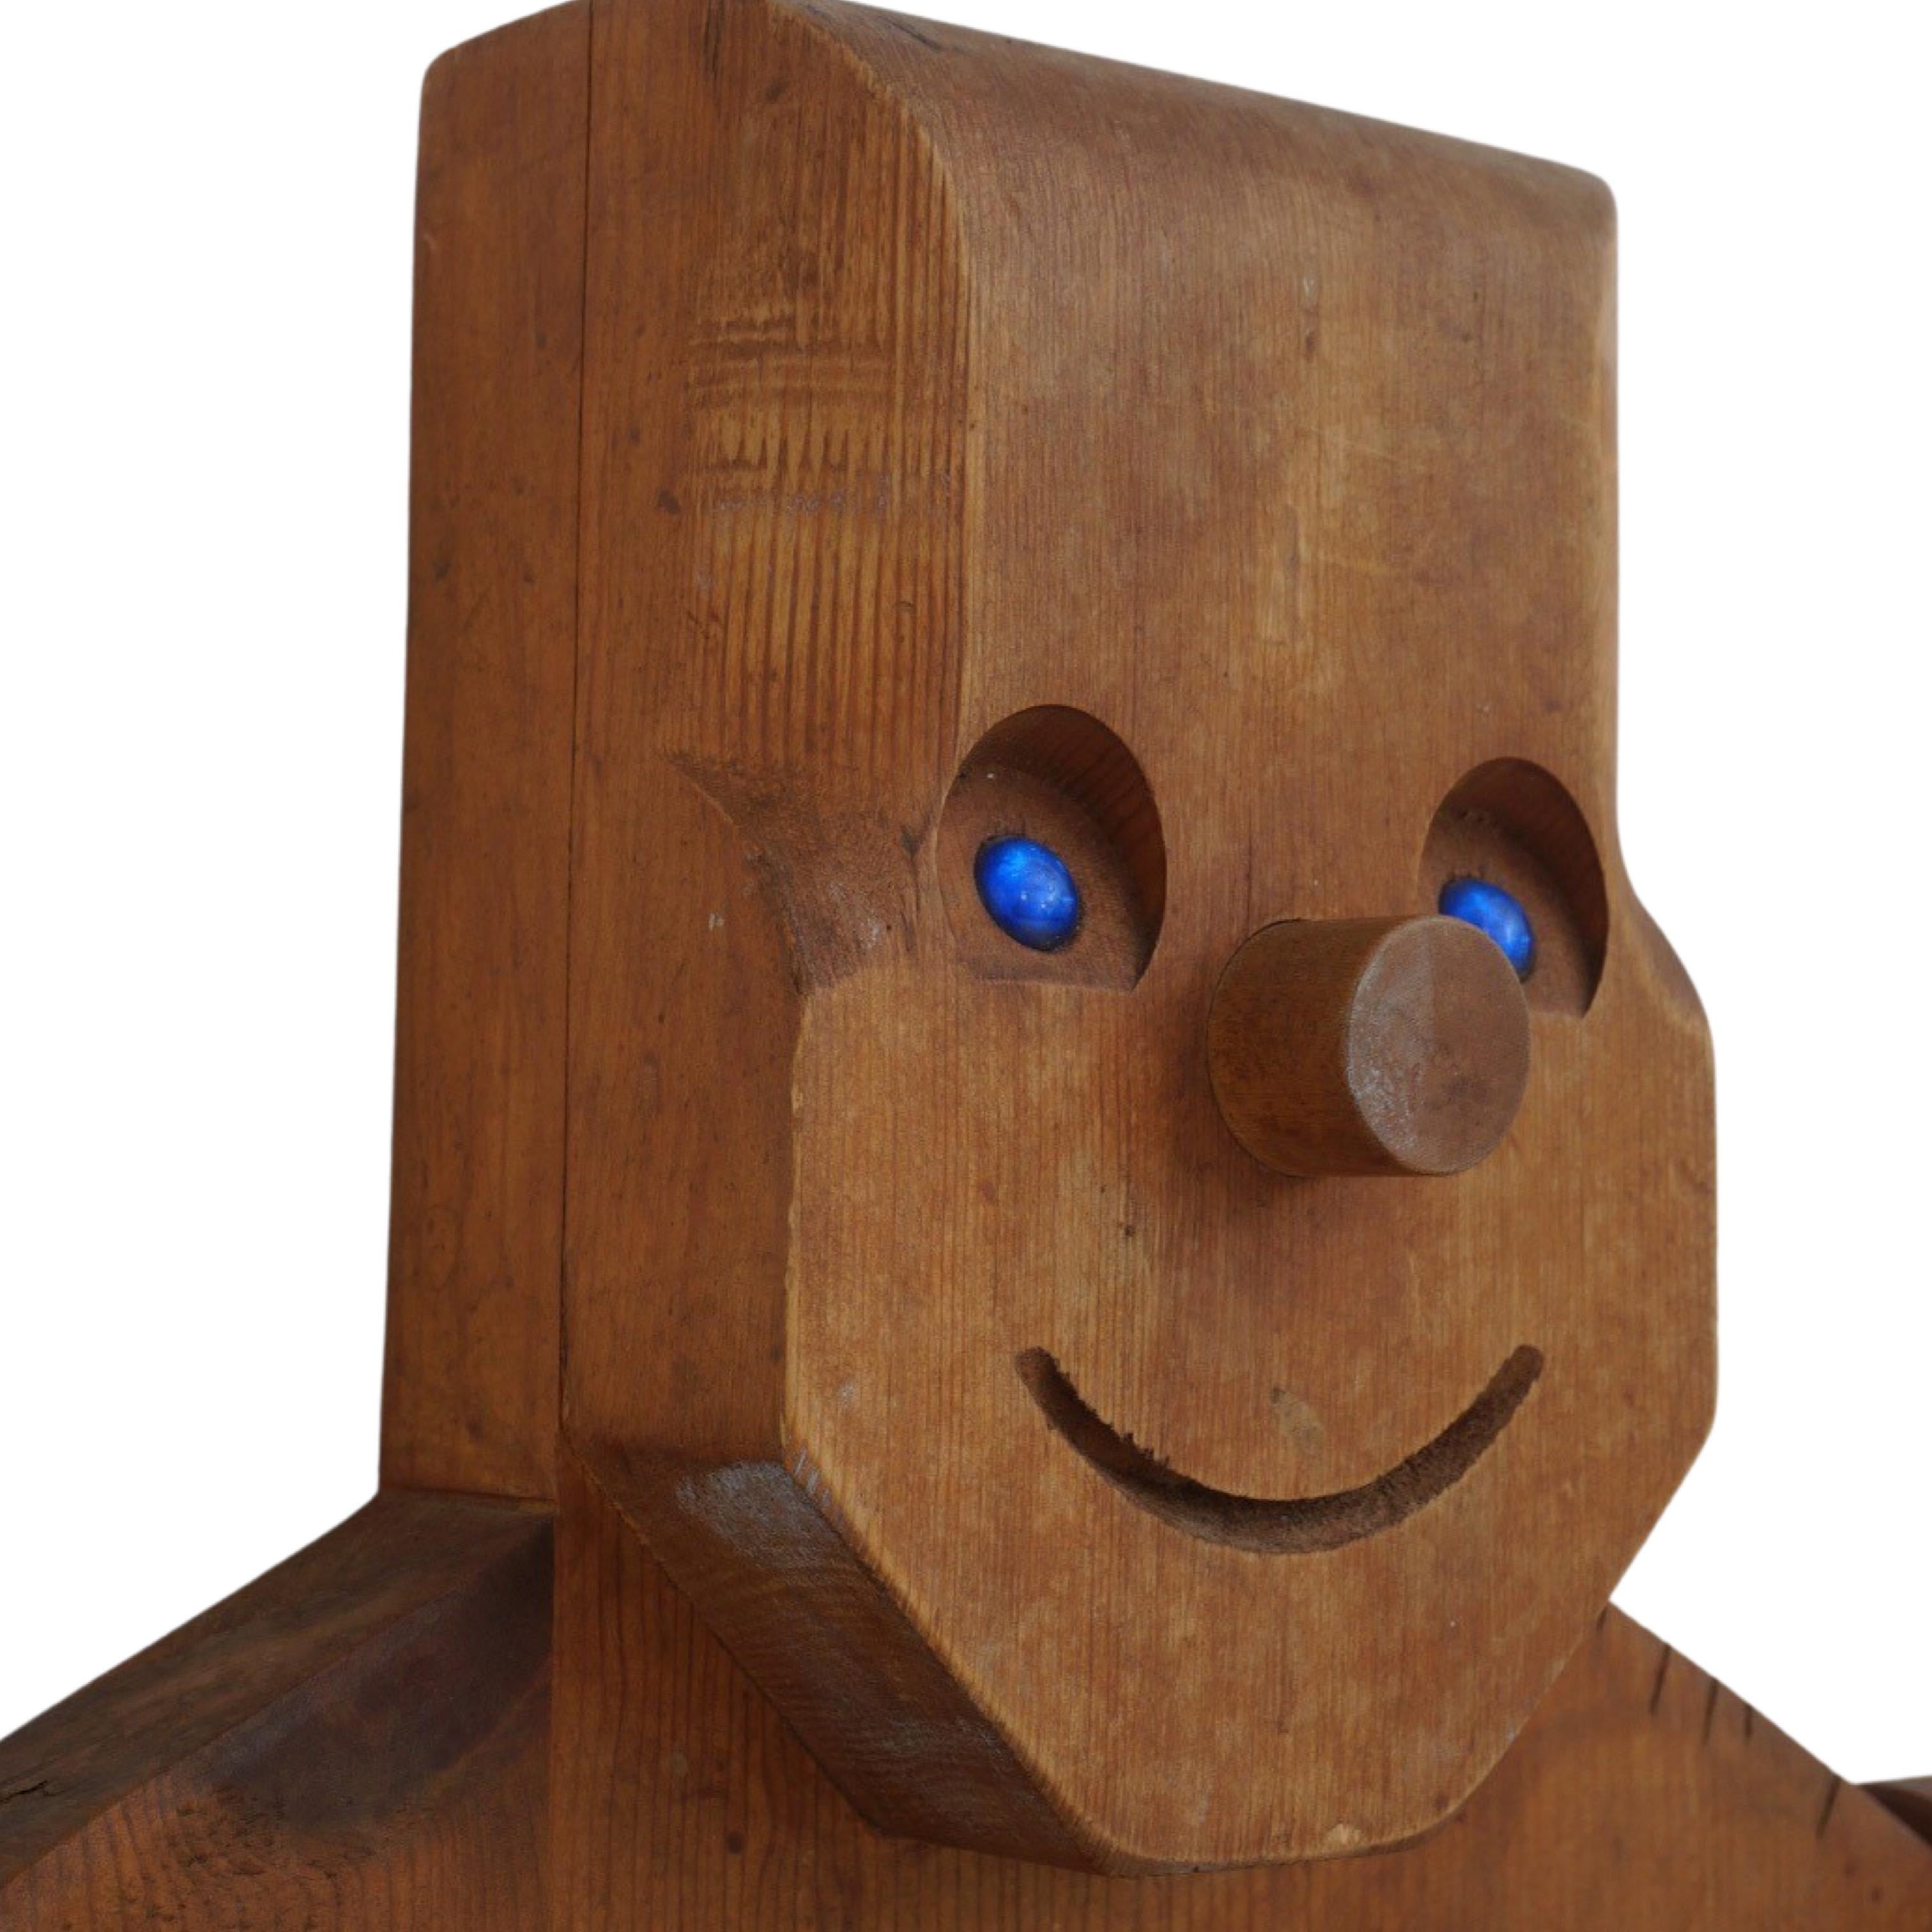 This almost life-sized jointed wood figure isn't just a conversation starter; he's a conversation monopolizer! Is a home really ever complete without one?! Created and designed by Don Ellefson in the 1980s, it's a nod to quirky folk art with a